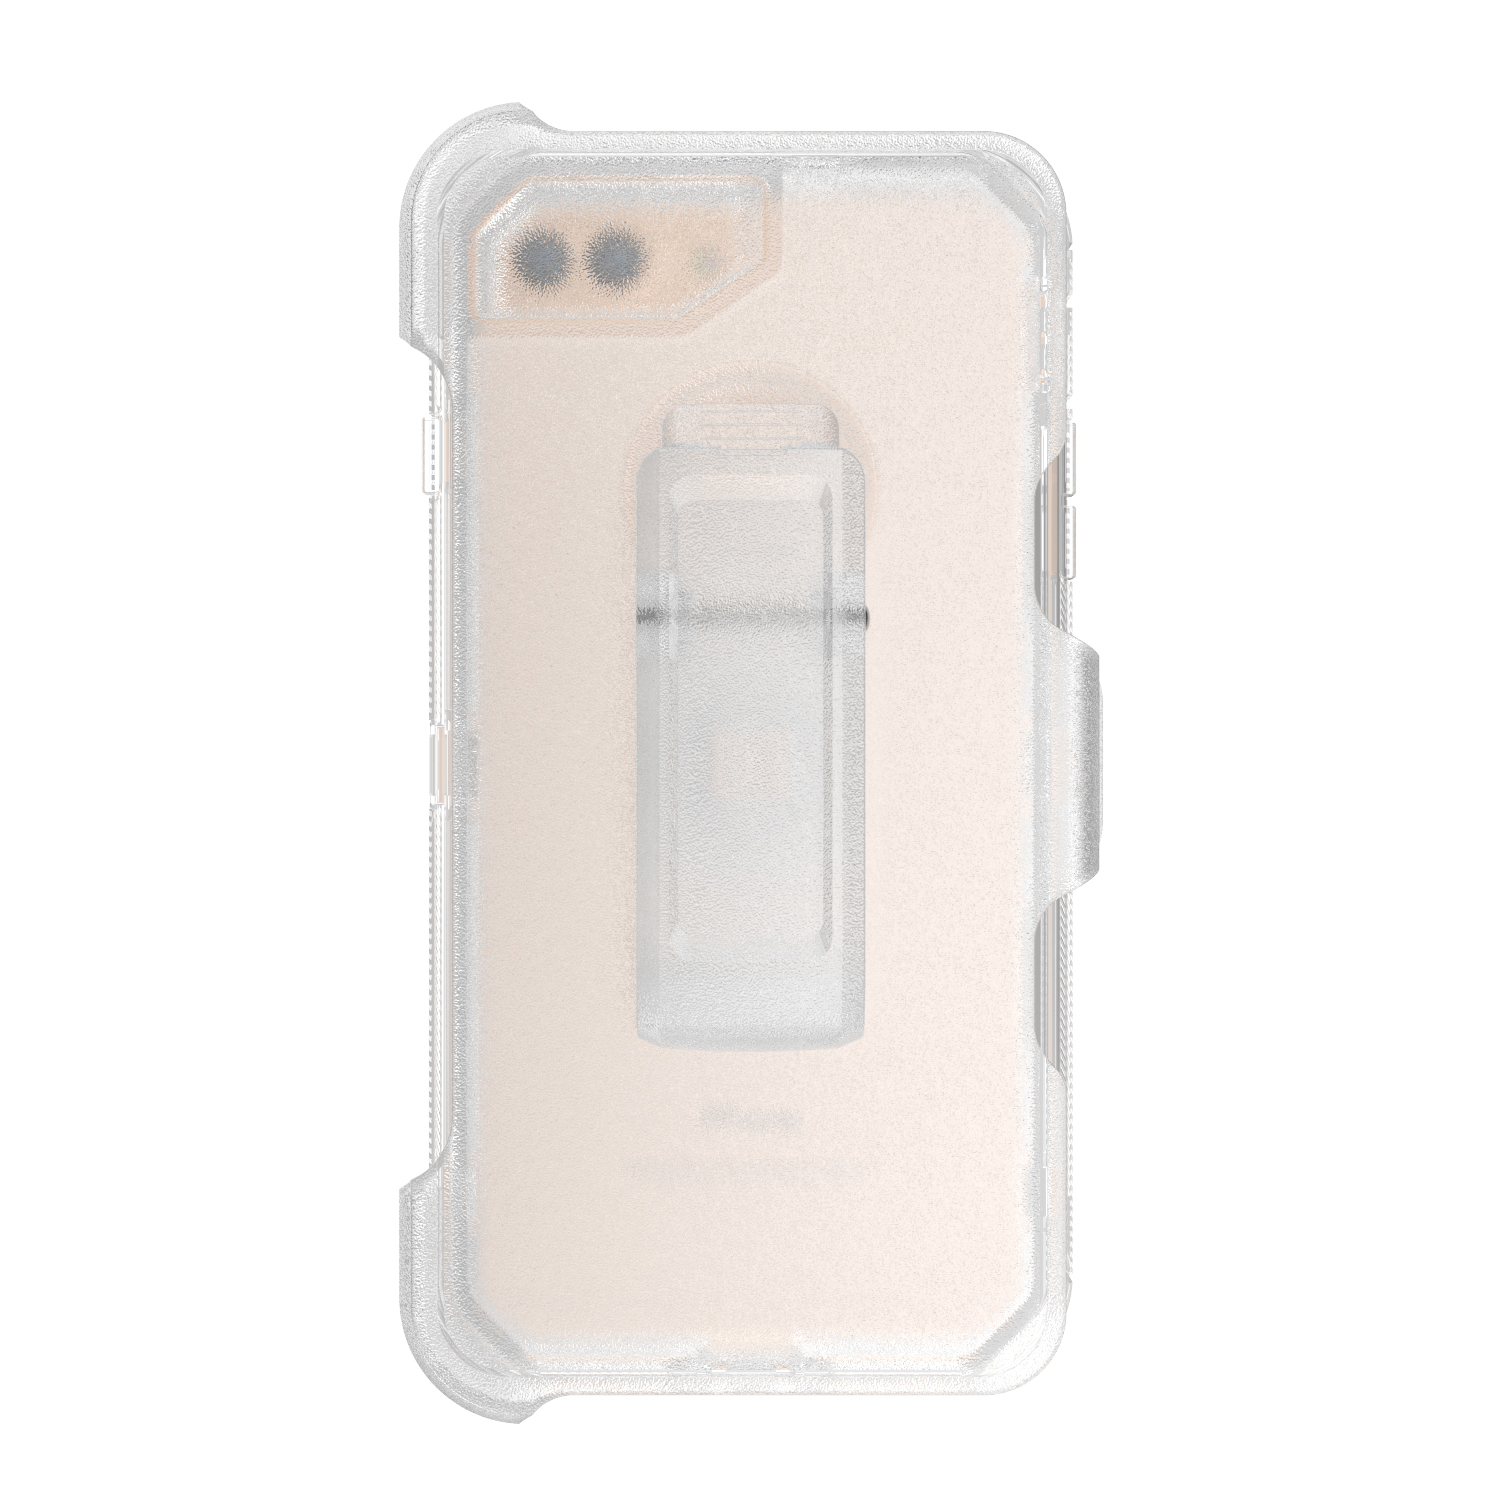 iPHONE Xs Max Premium Armor Robot Clip Only (Clear)